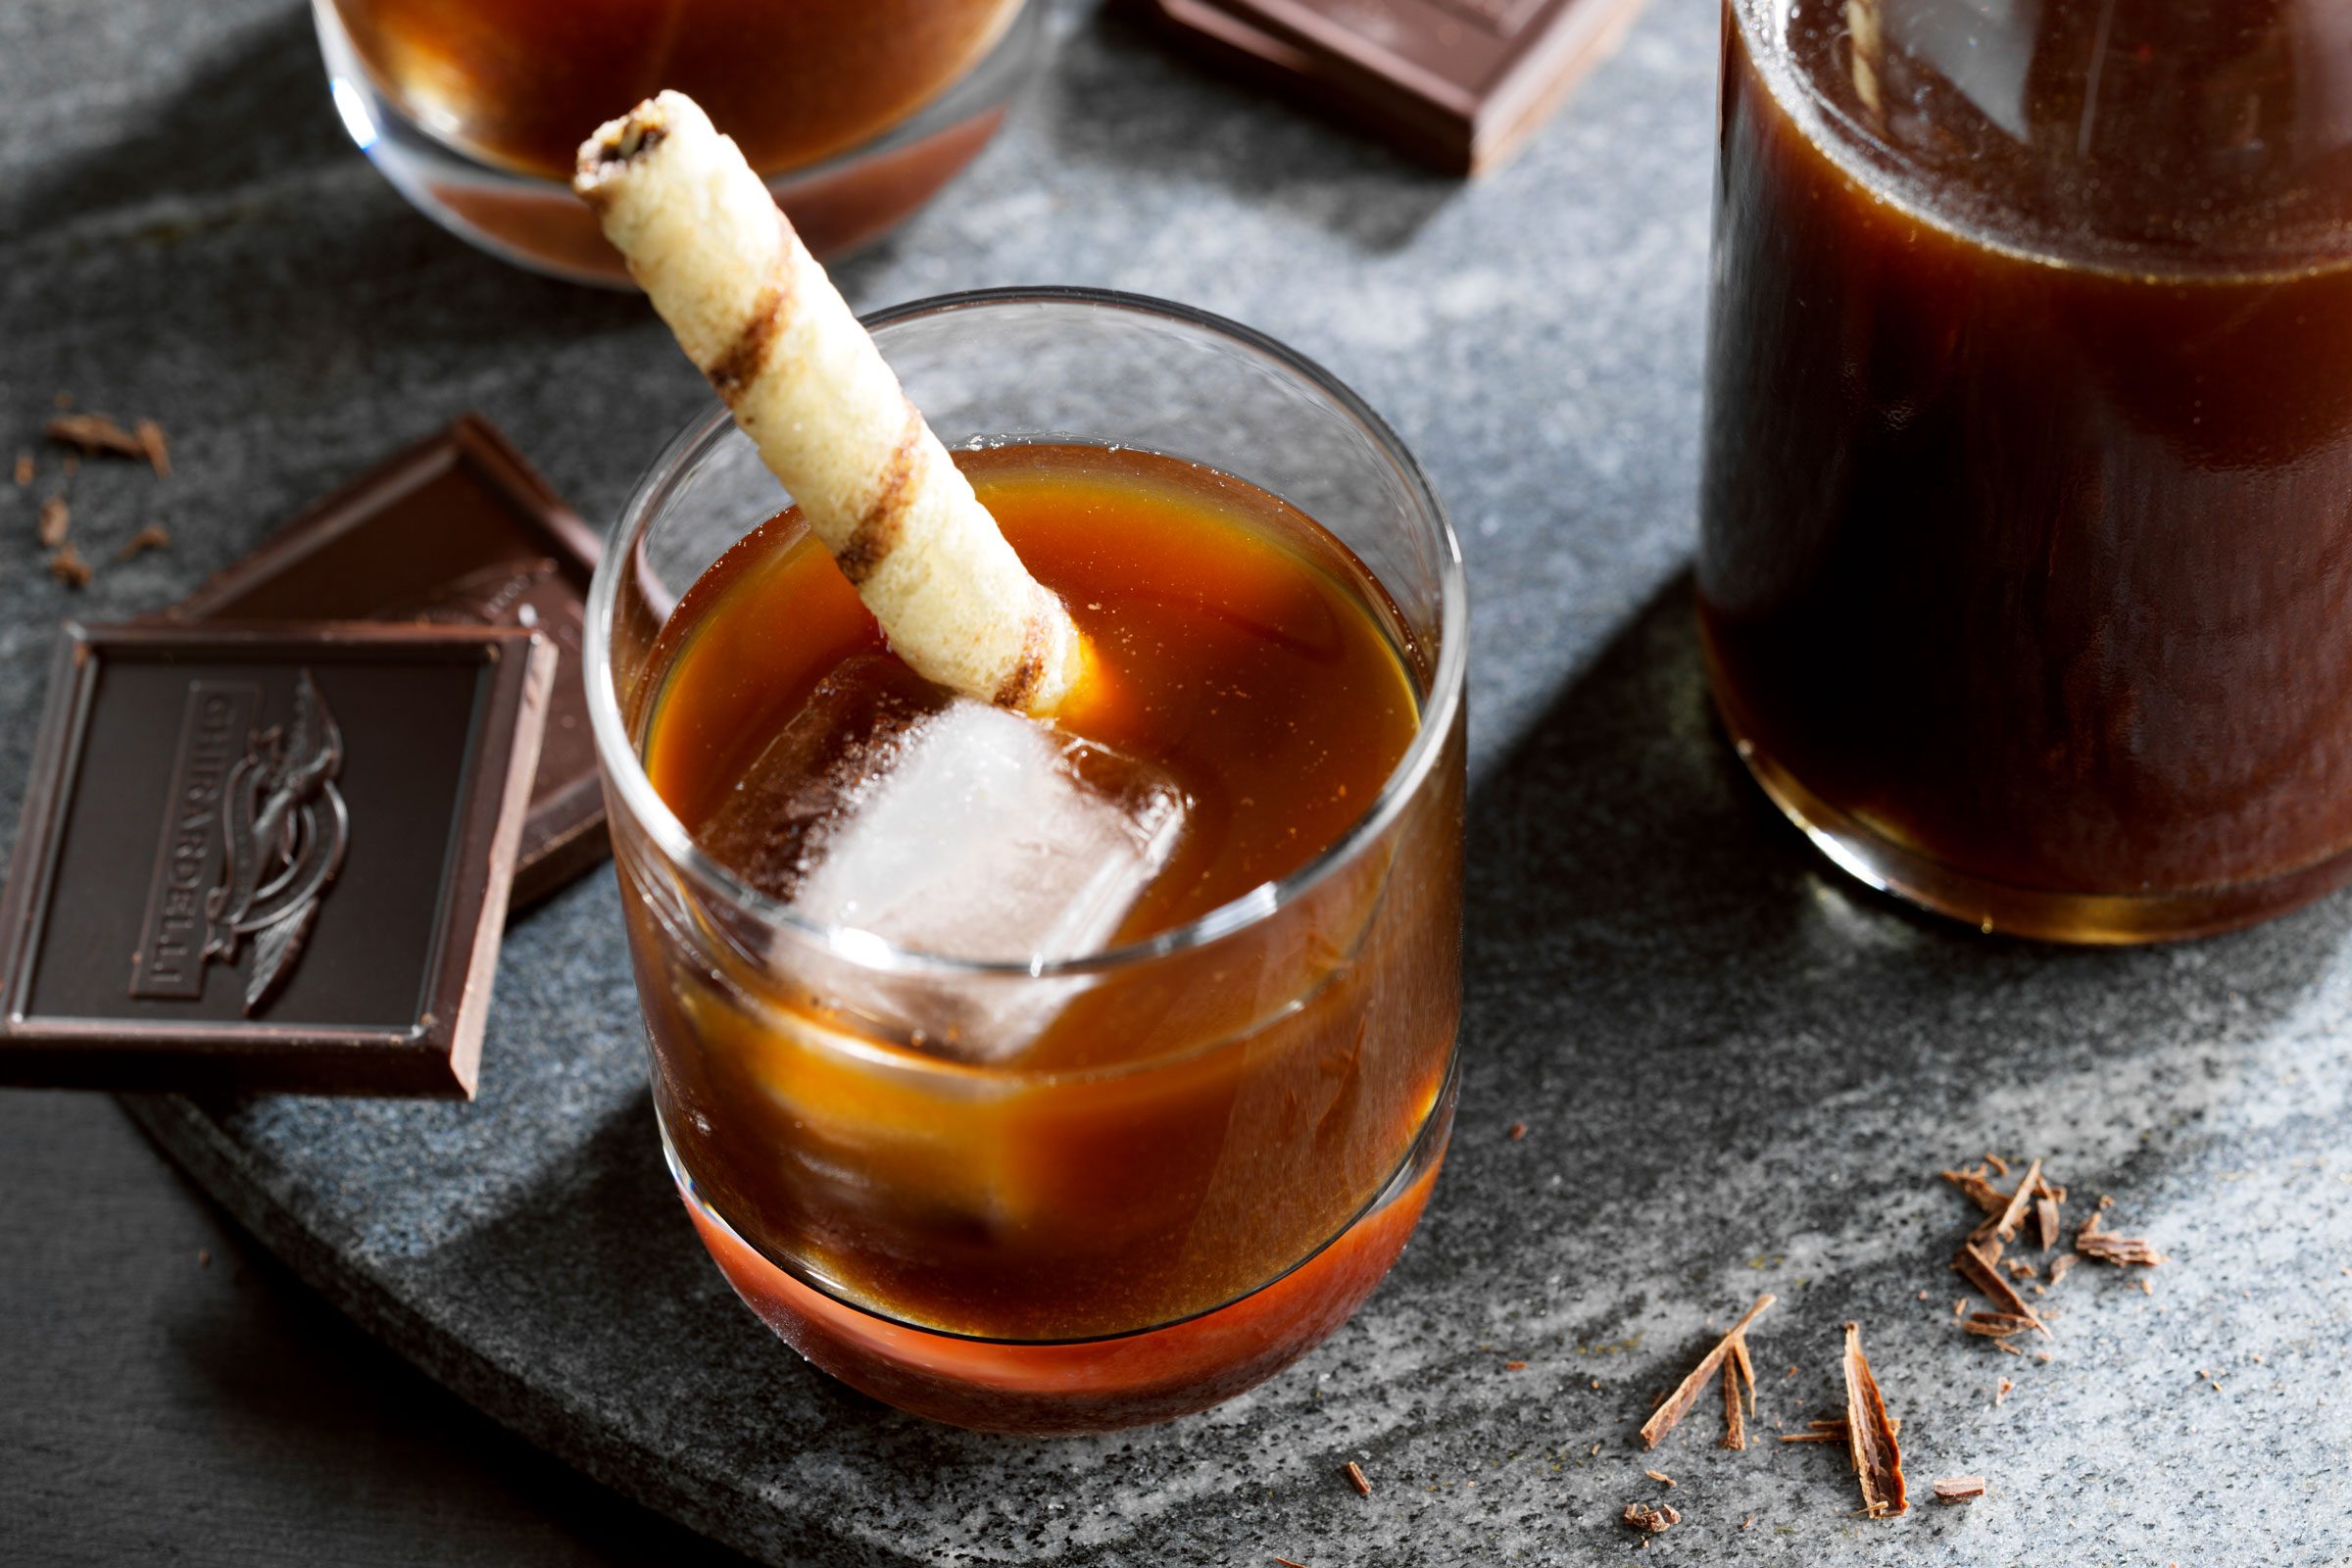 Chocolate Liqueur in a glass with a pirouette cookie in the drink and chocolate squares next to the glass